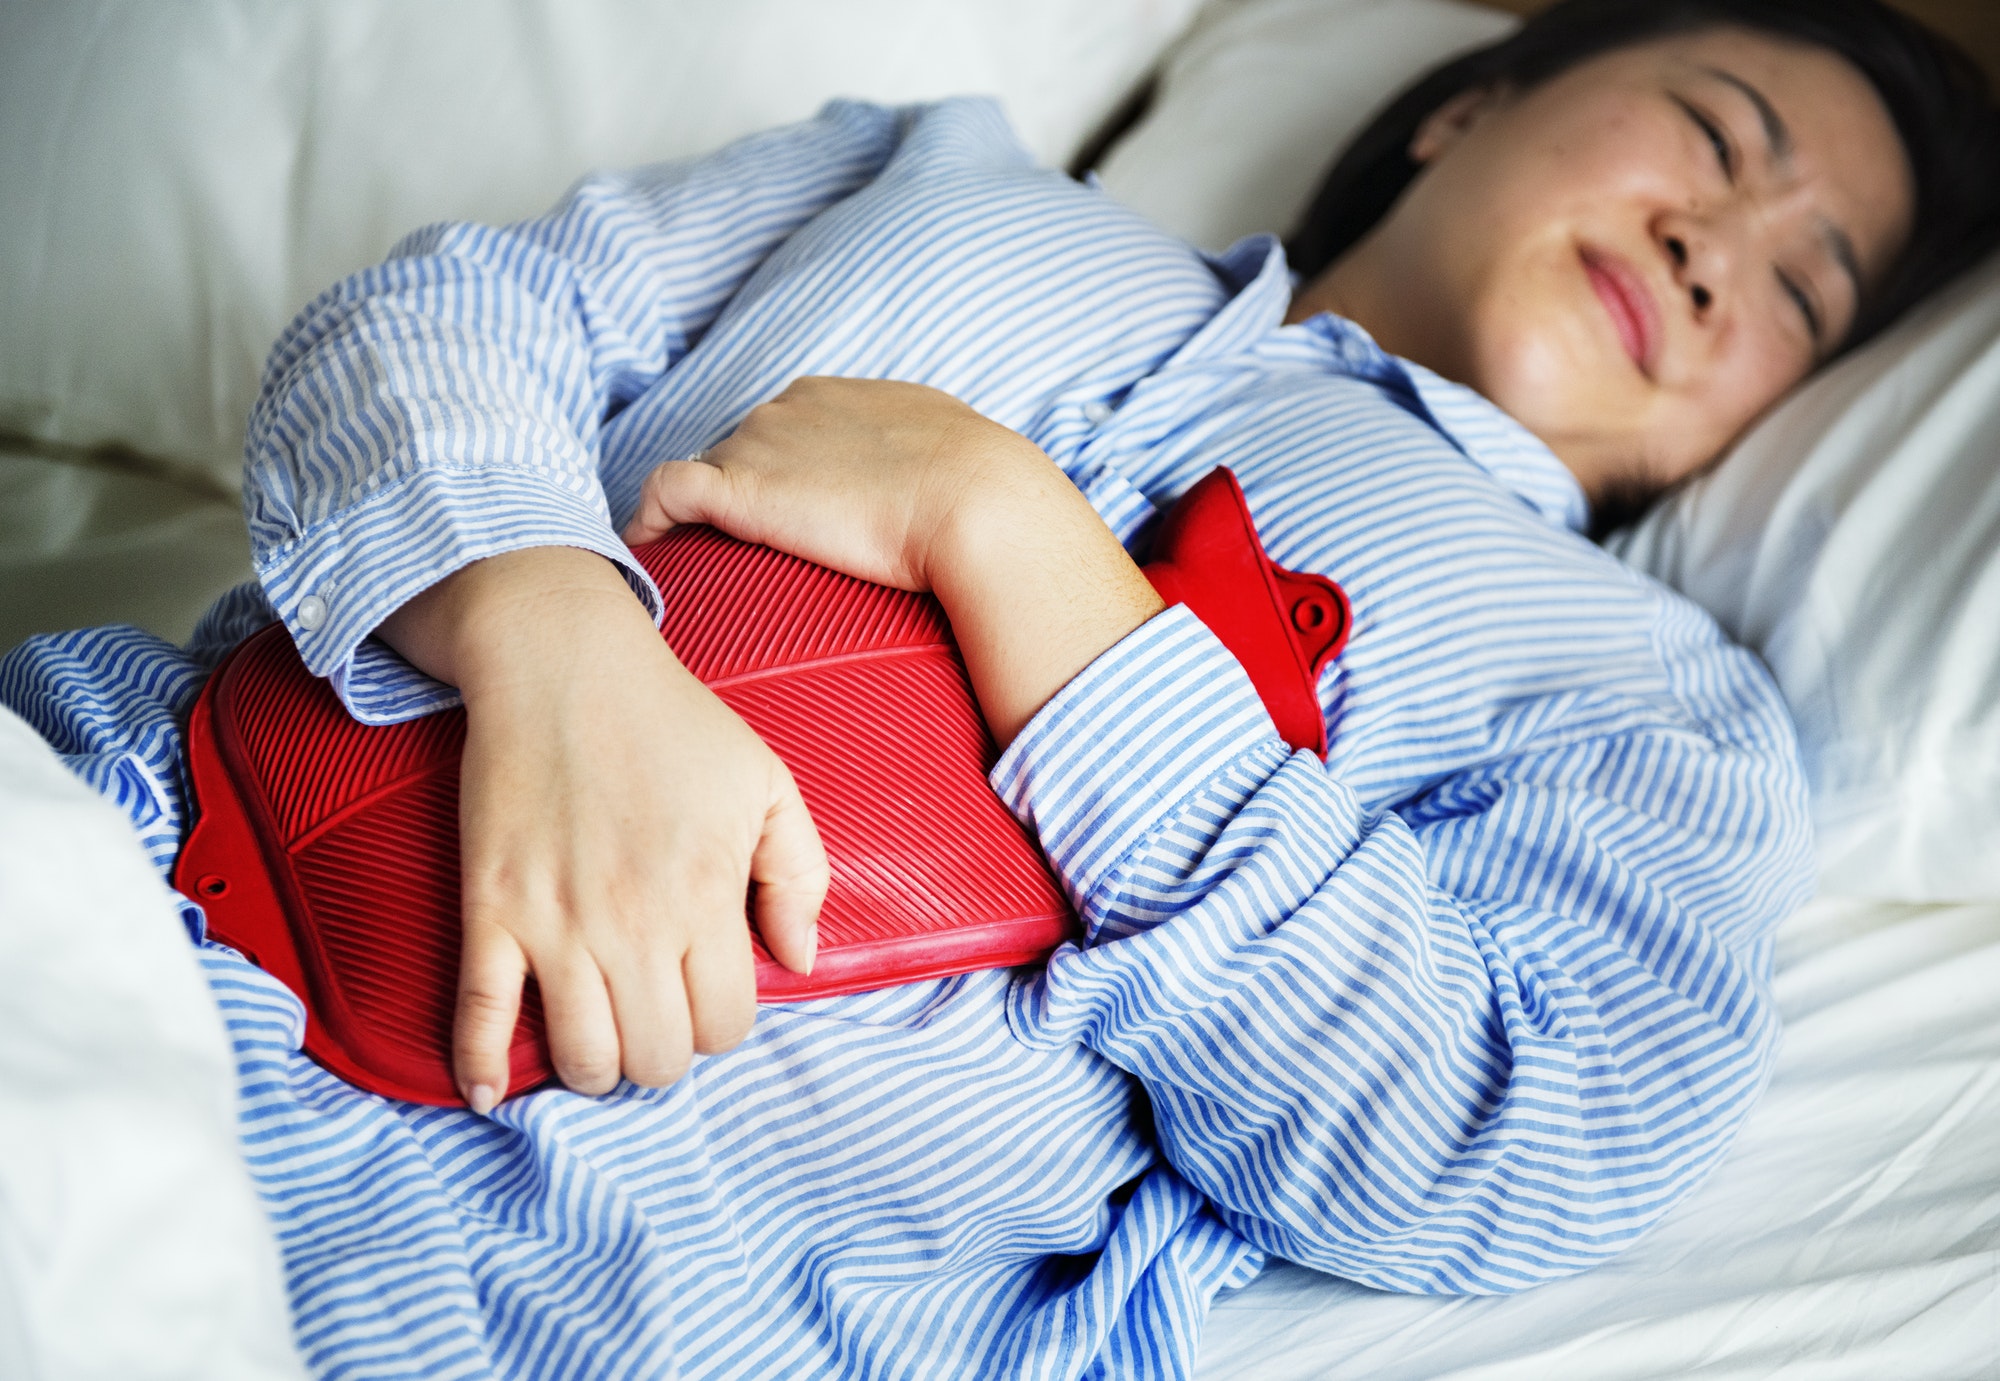 A woman in pain holding a hot water bottle